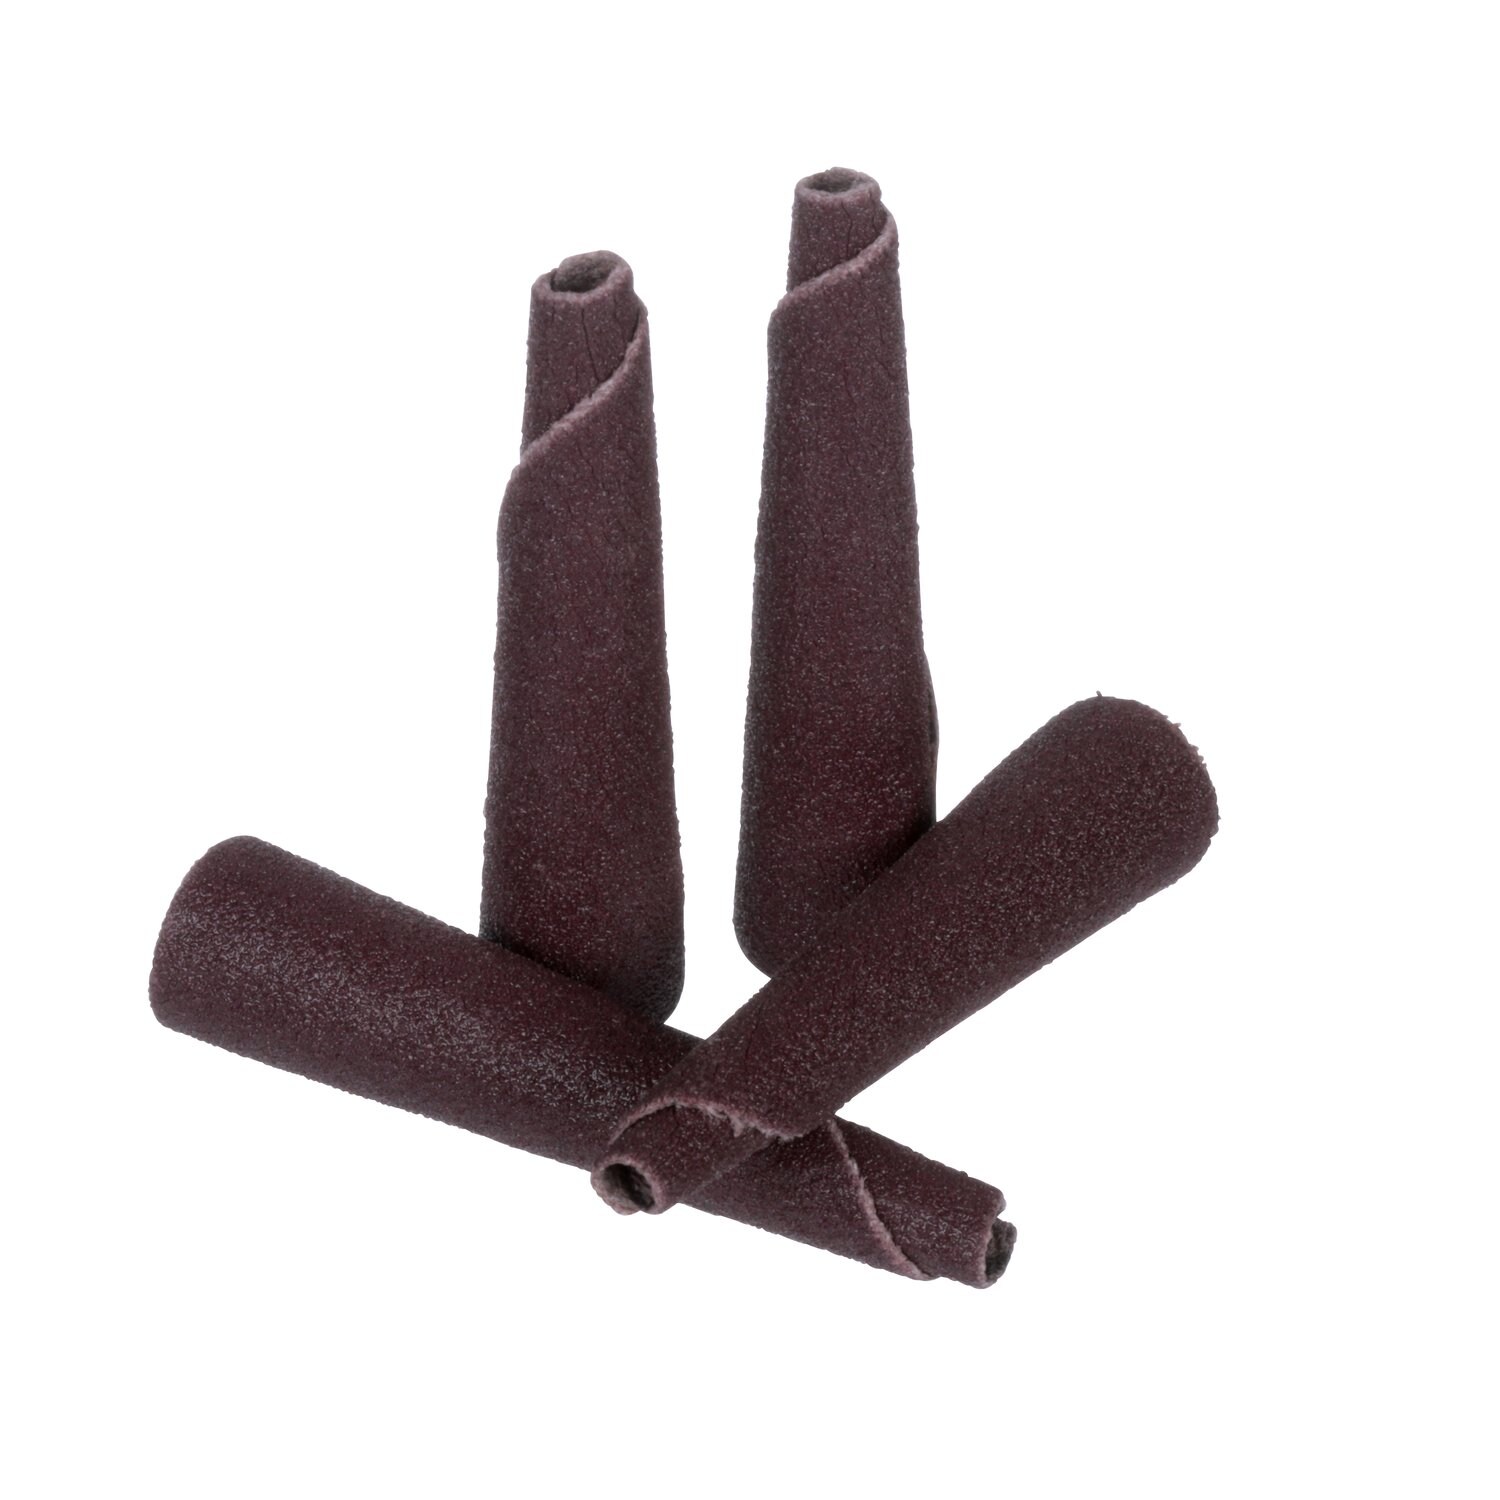 7100116601 - Standard Abrasives Aluminum Oxide Tapered Cone Point, 710130, C-30 120, 100 ea/Case